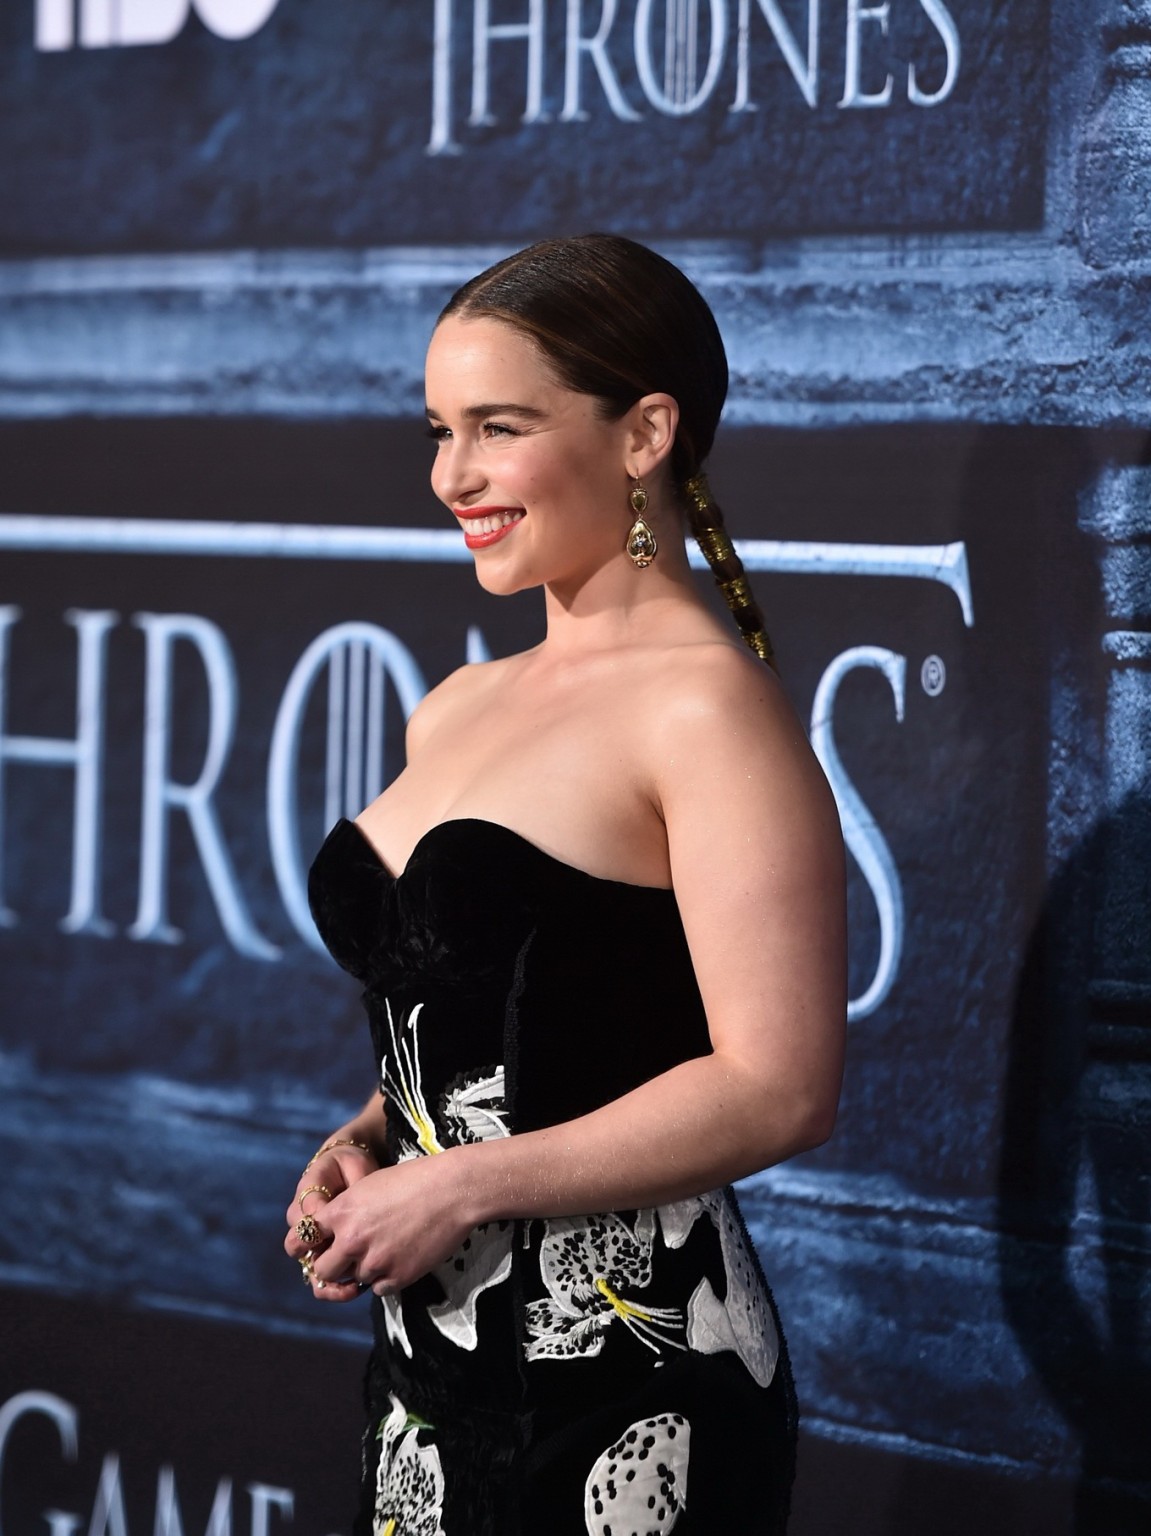 Emilia Clarke shows off her big boobs in a strapless dress #75143849